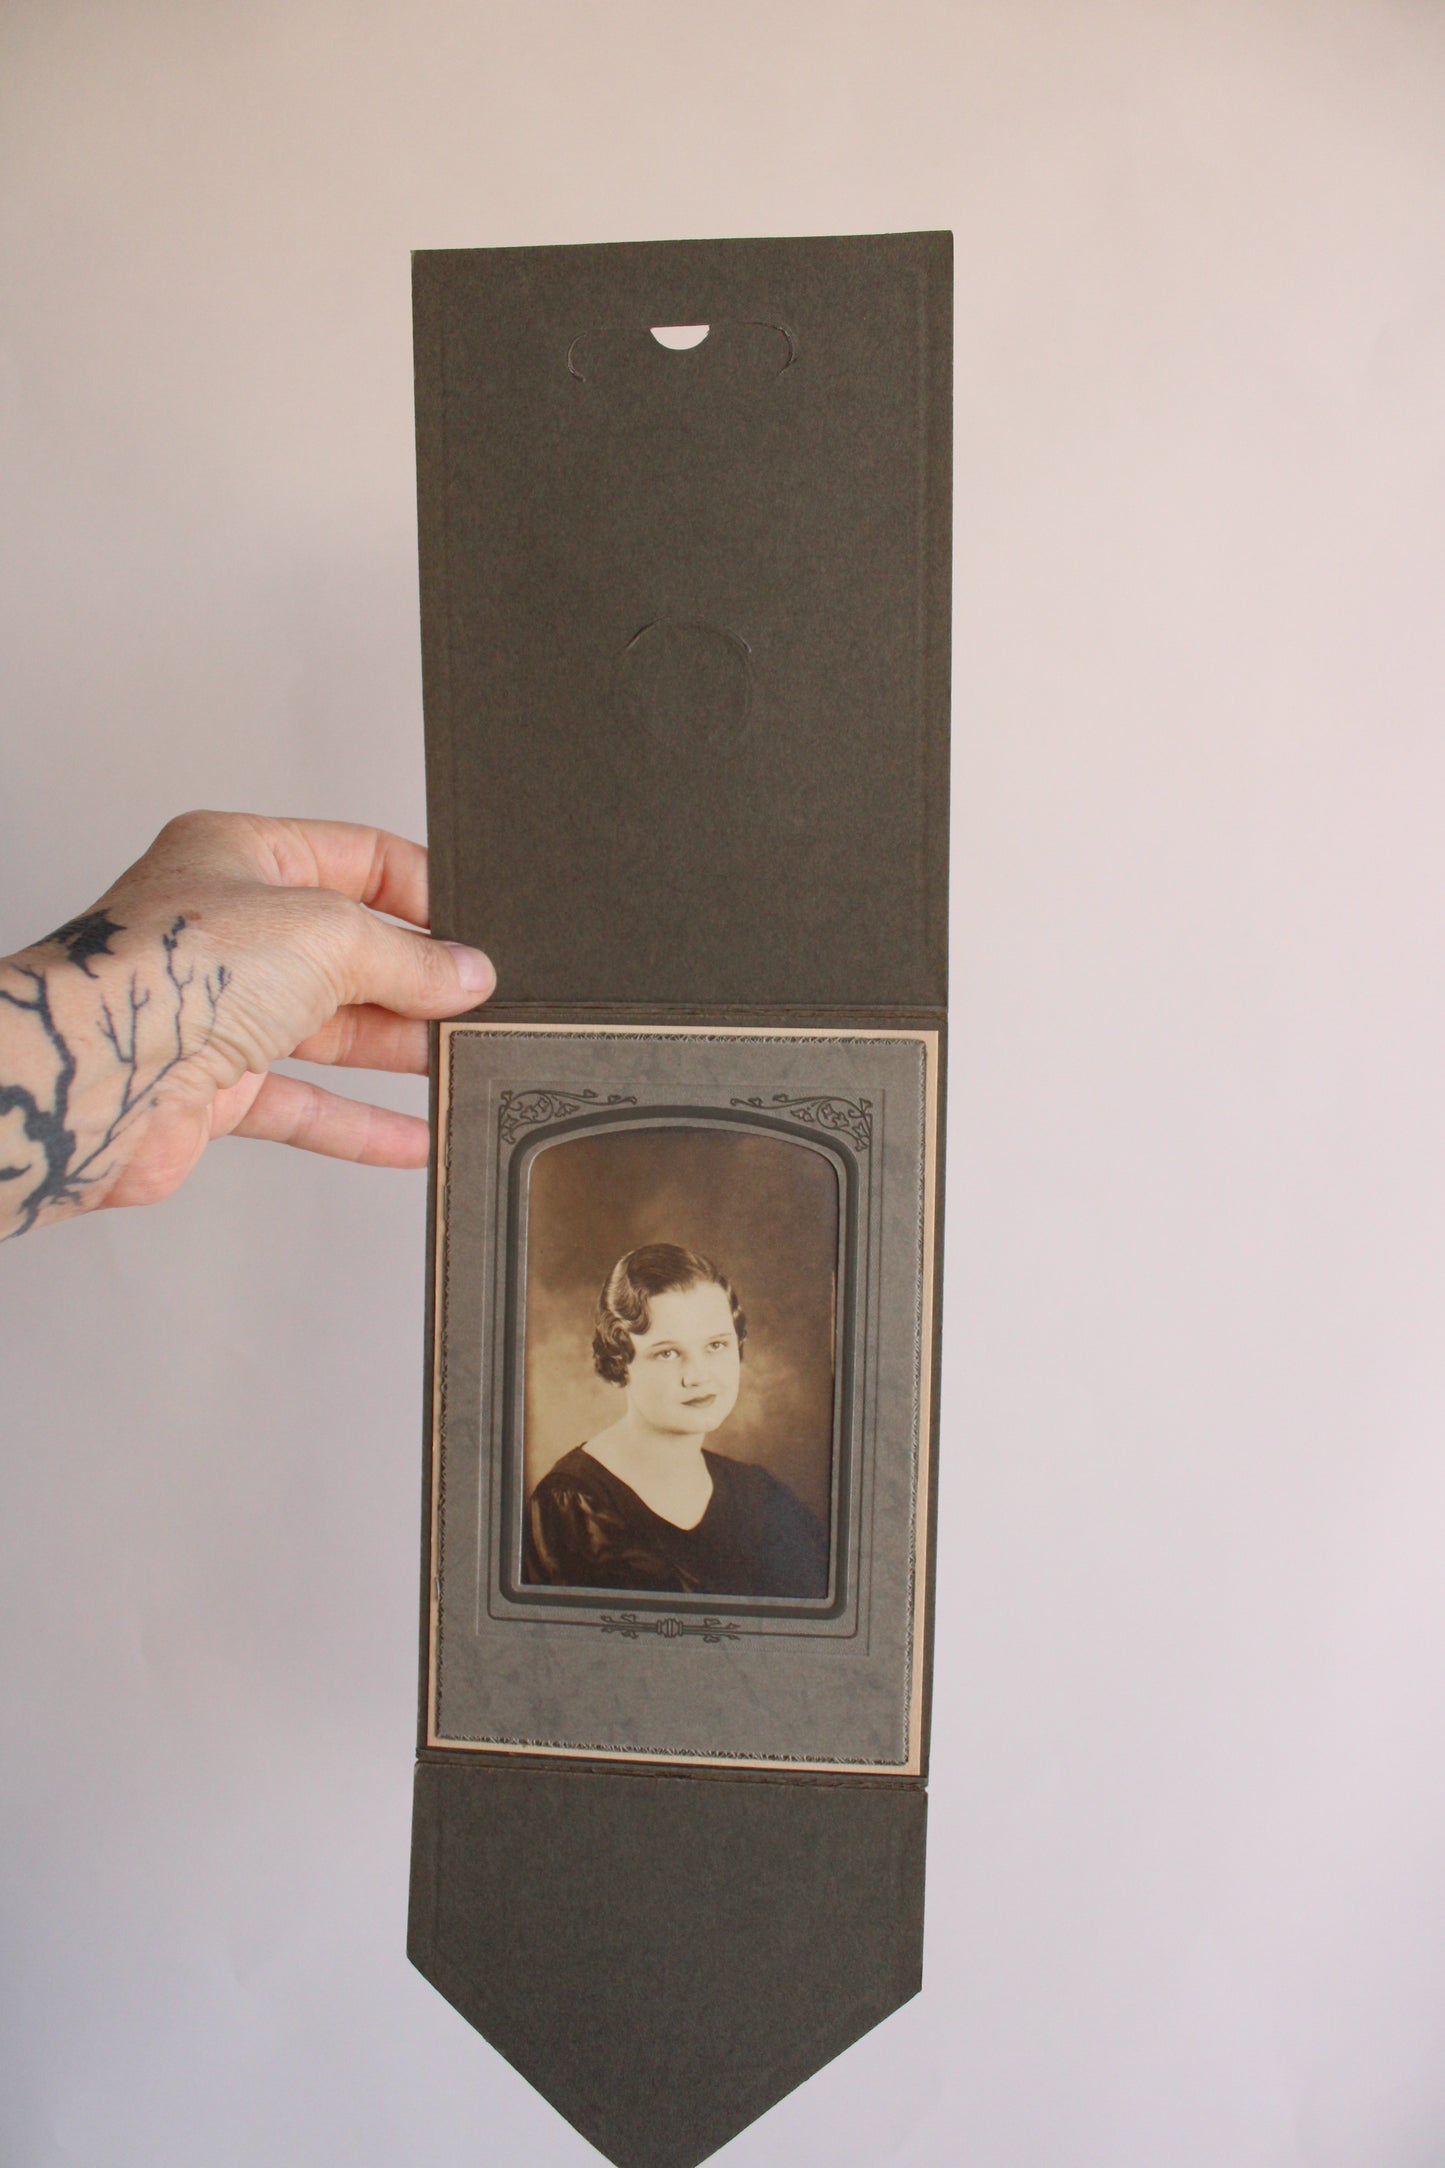 Vintage 1920s Photograph in Cardboard Cover